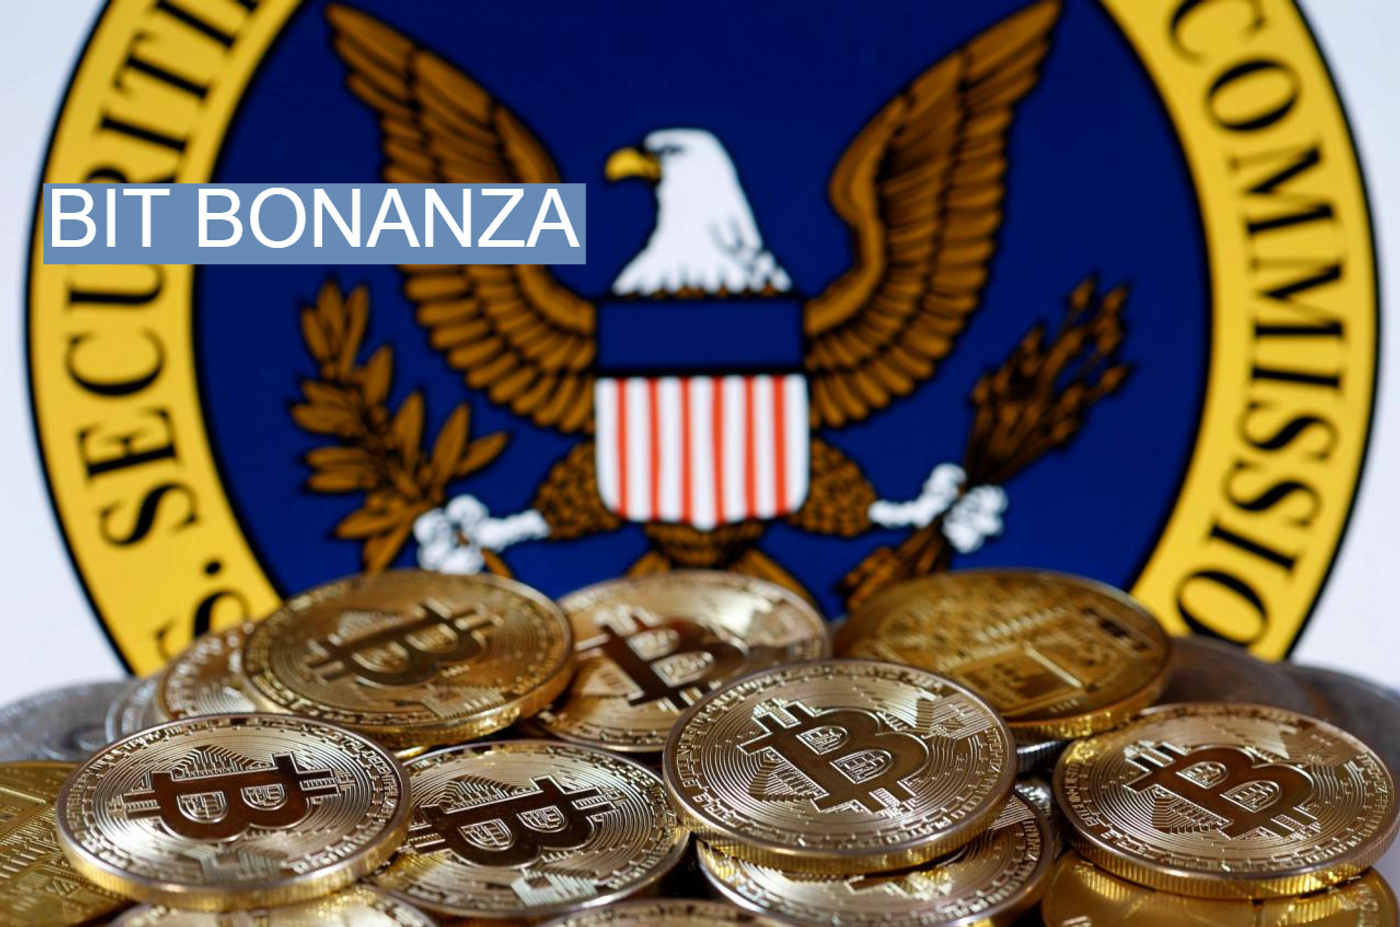 A visual representation of the digital cryptocurrency Bitcoin is displayed in front of Securities and Exchange Commission (SEC) logo. 